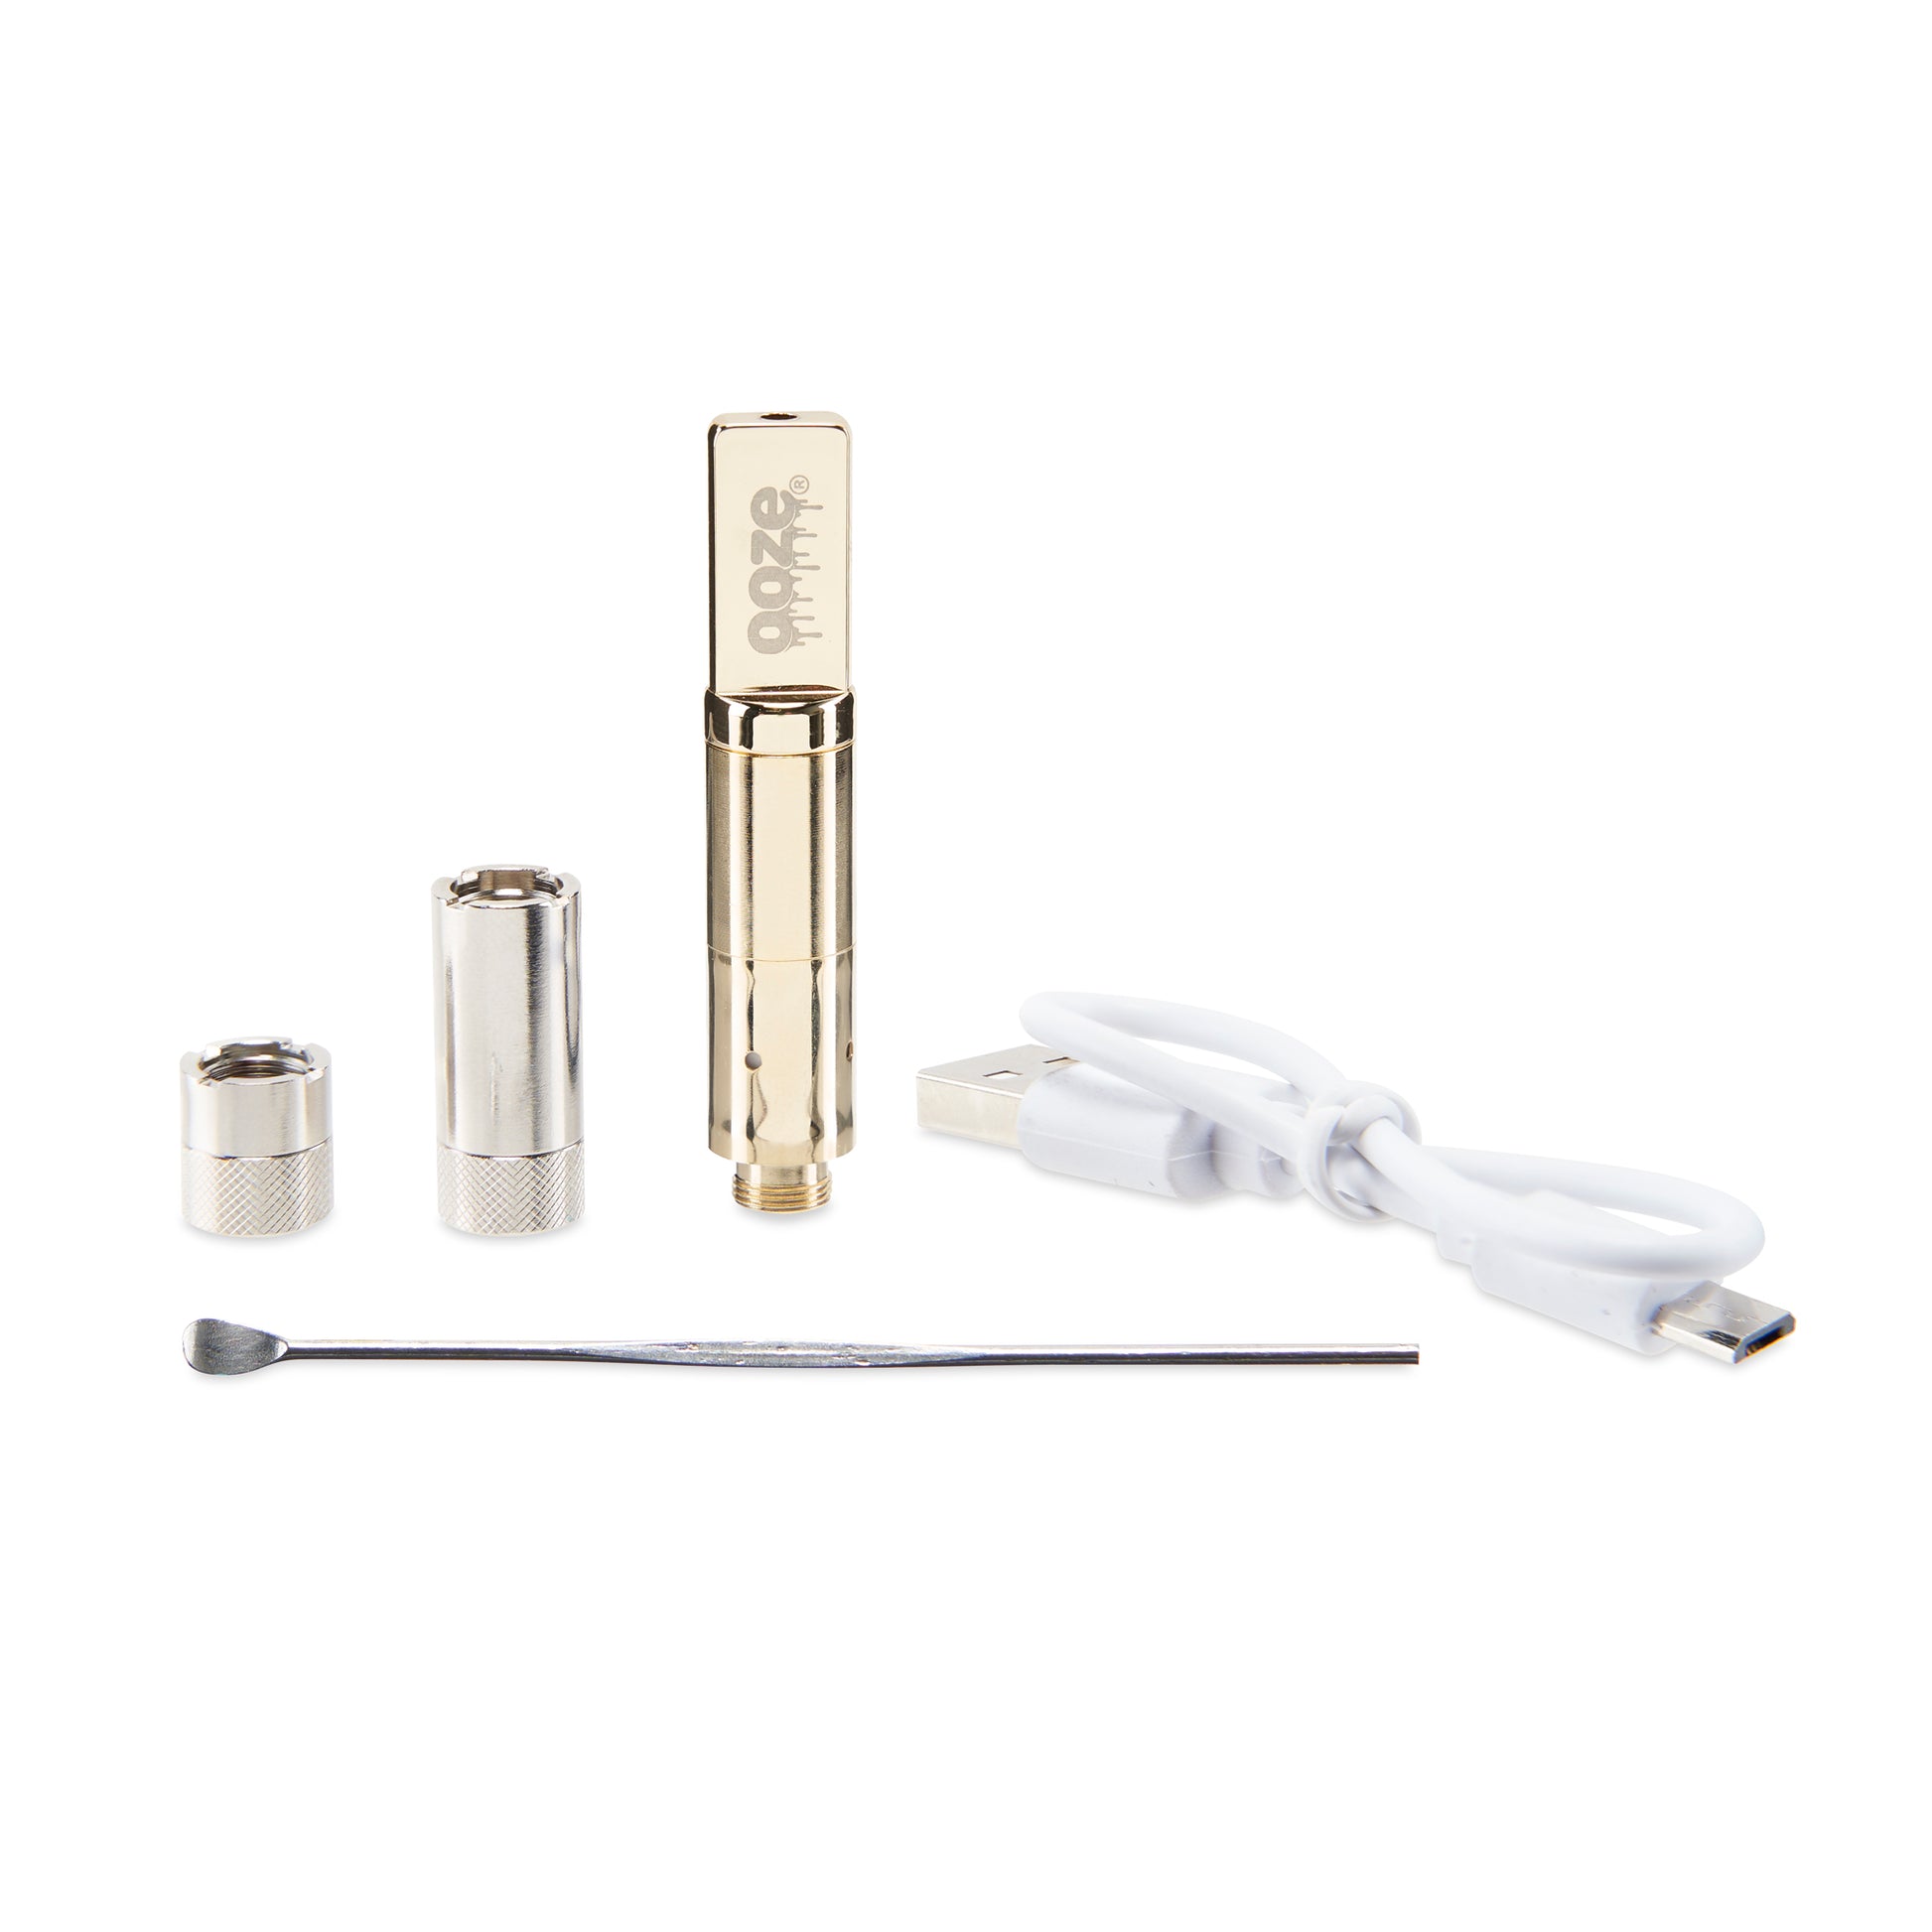 The Lucky Gold Ooze Duplex Pro Vaporizer's accessories are shown neatly lined up. The 0.5g adapter and 1ml adapter are next to the gold wax atomizer, which is next to the white type-c charging cable. The dab tool lies in the front.